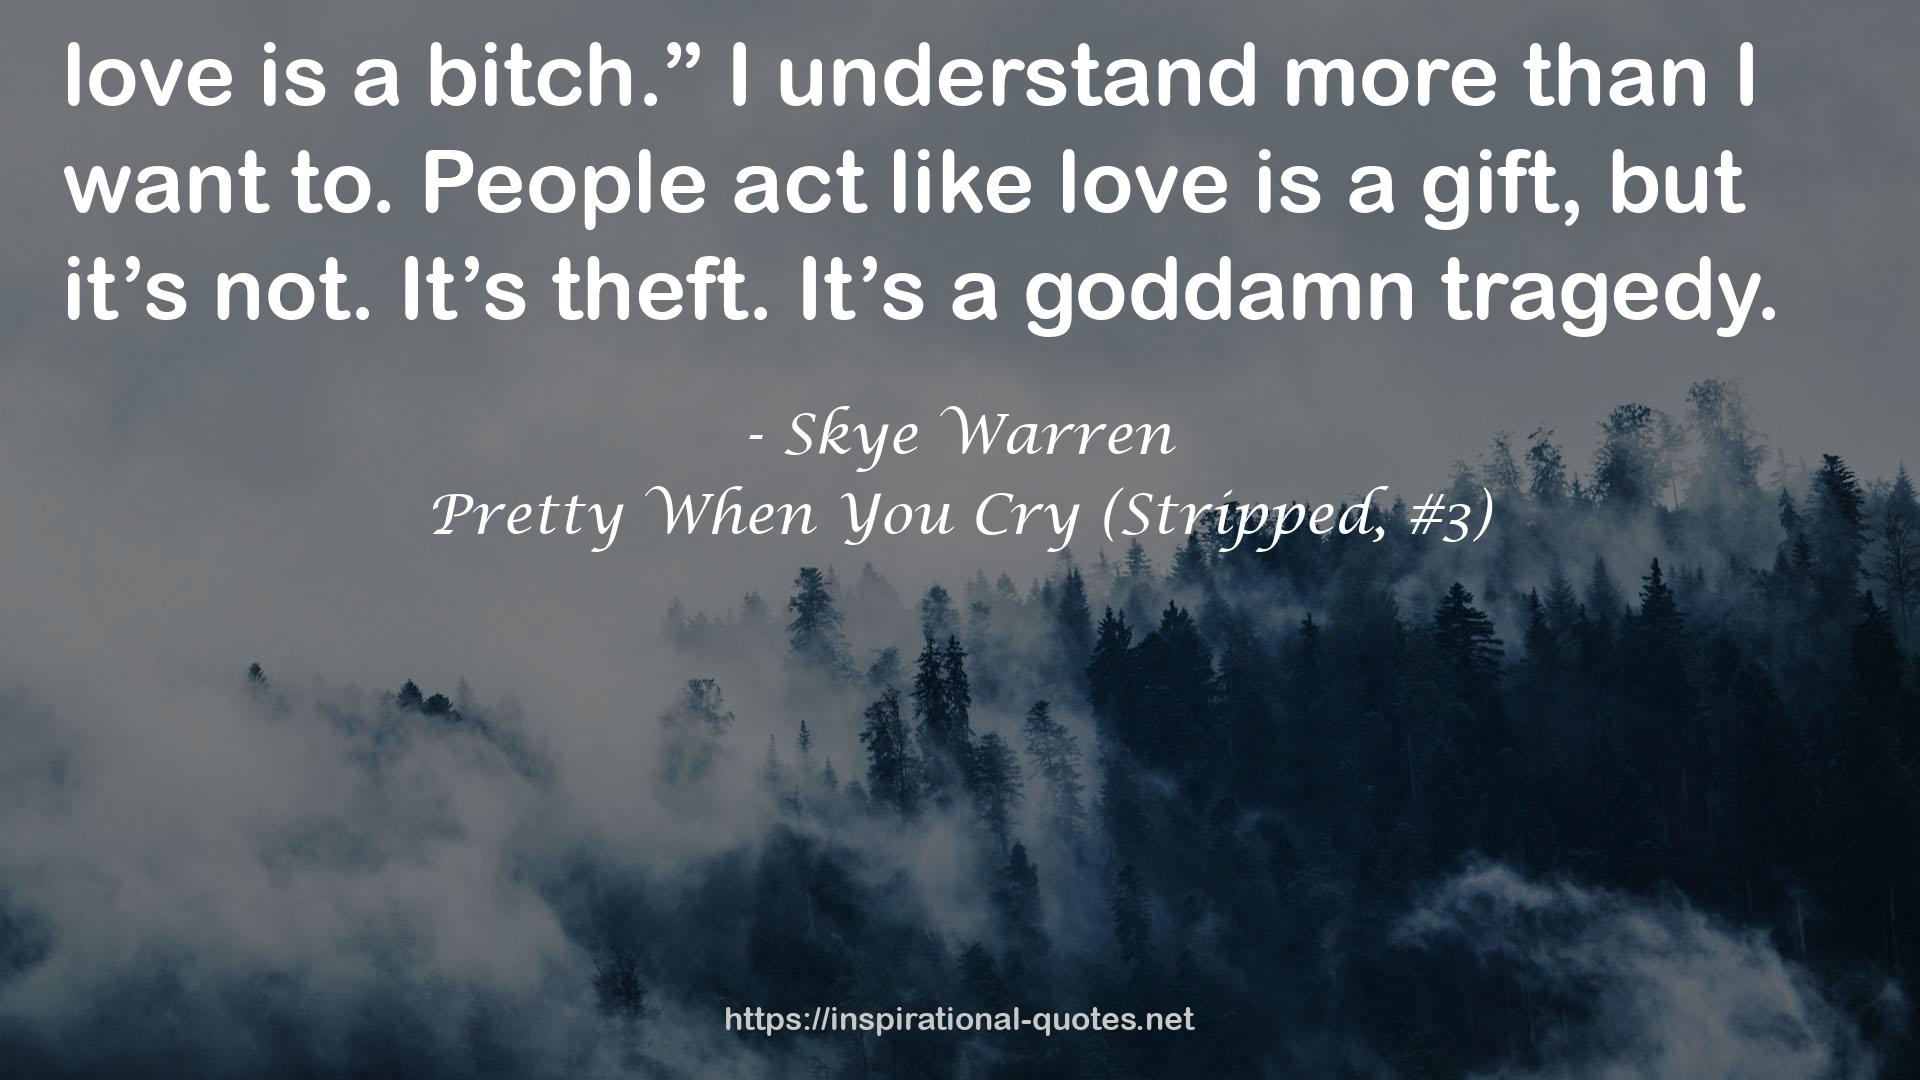 Pretty When You Cry (Stripped, #3) QUOTES